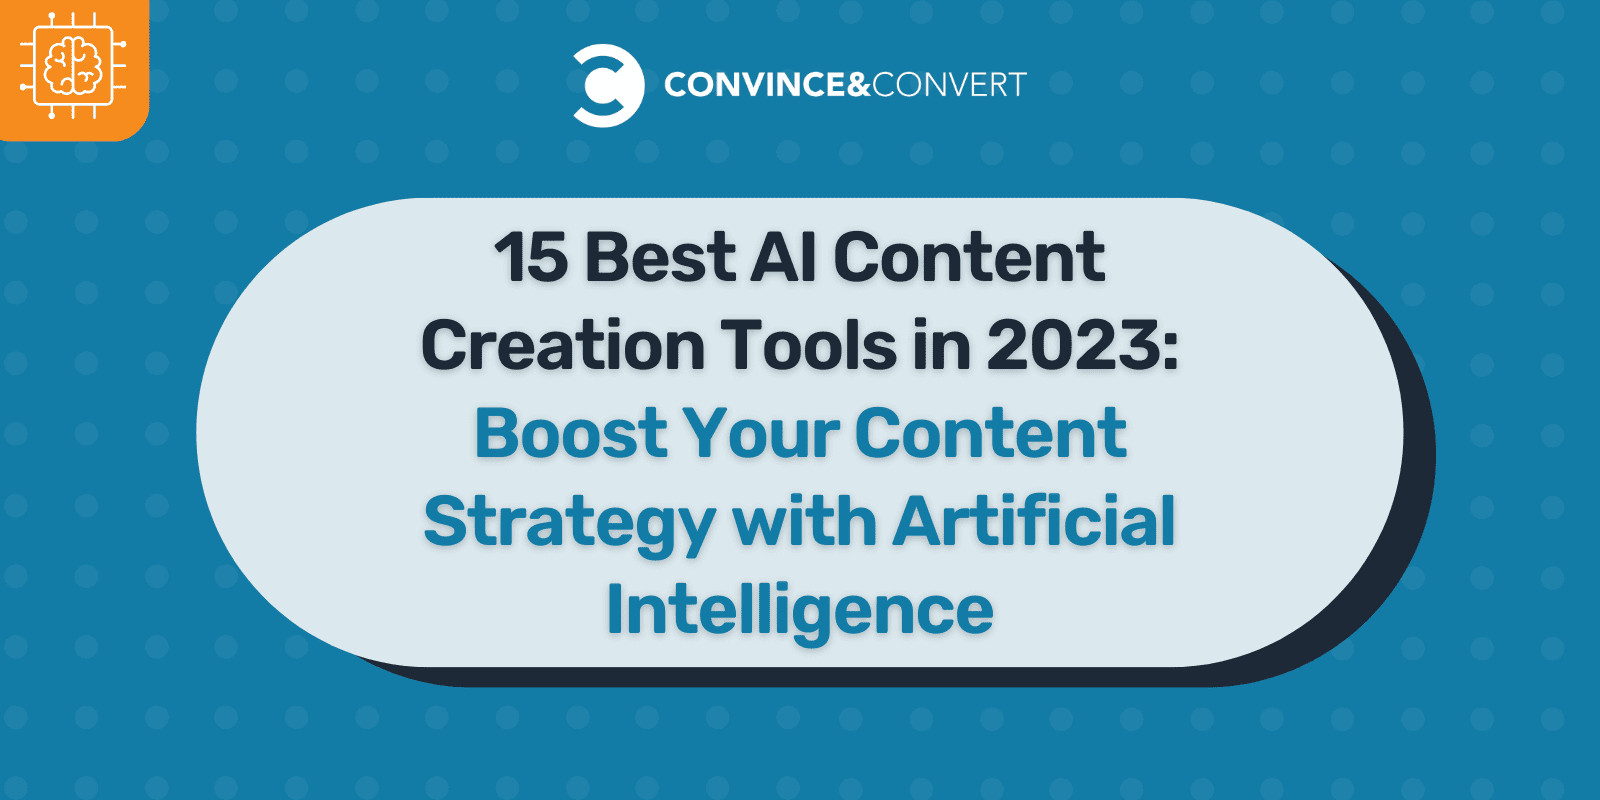 15 Best AI Content Creation Tools in 2023 Boost Your Content Strategy with Artificial Intelligence EarnFreeCashOnline